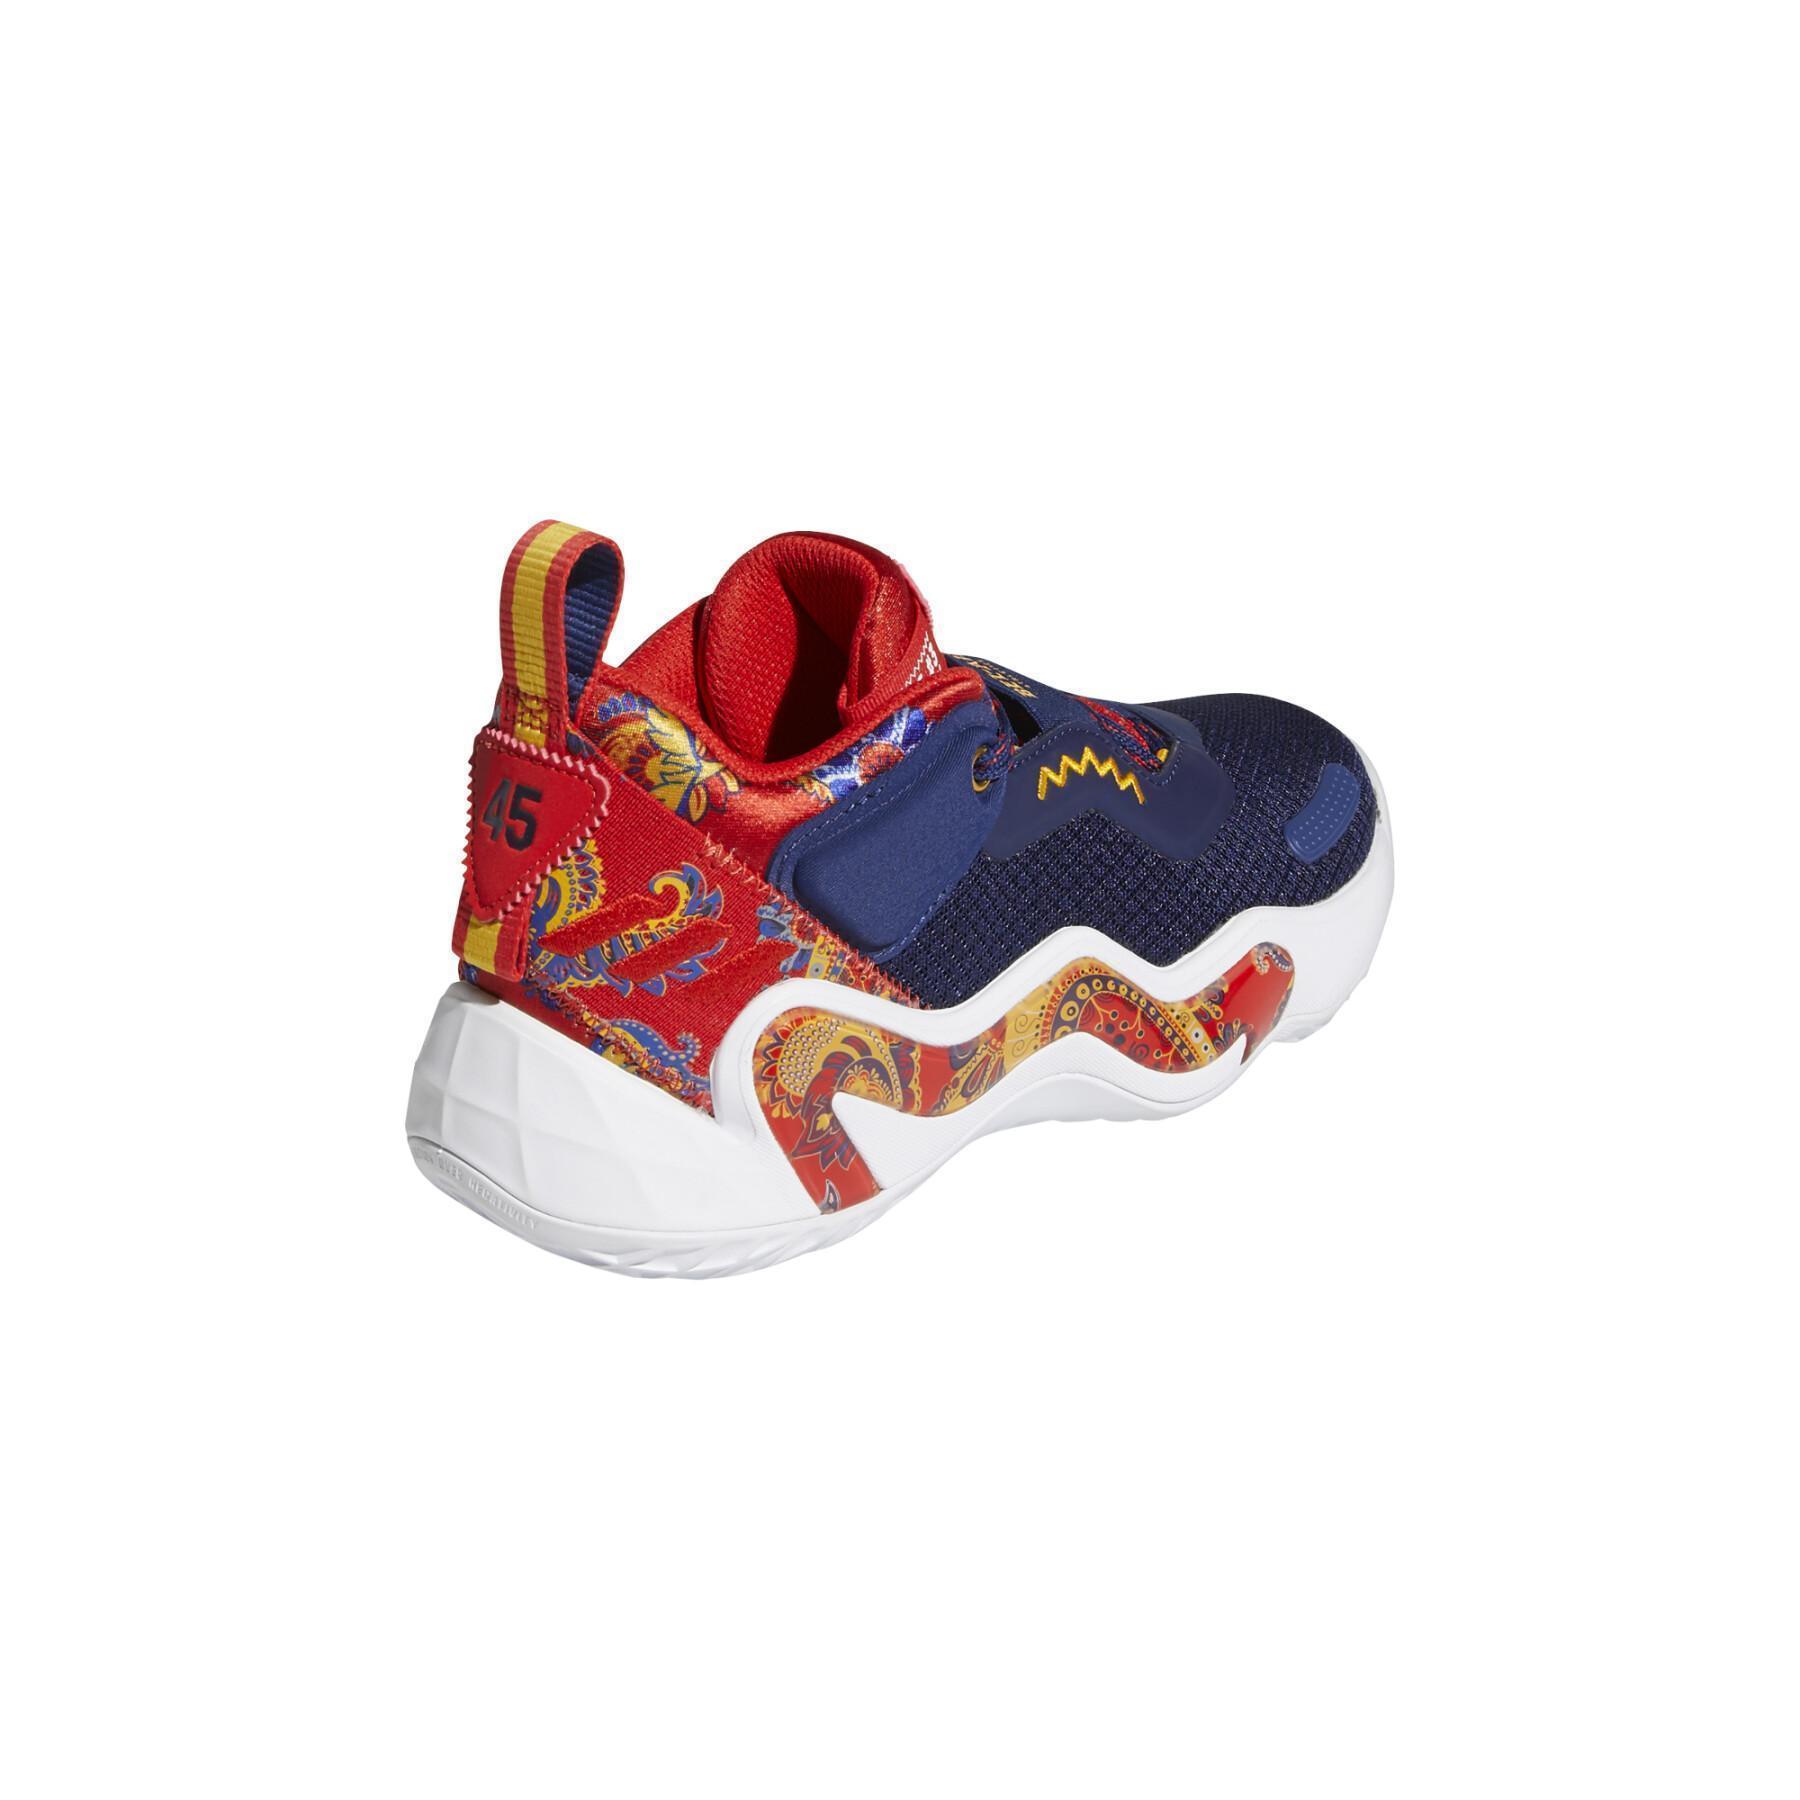 Chaussures indoor enfant adidas D.O.N. Issue 3 J